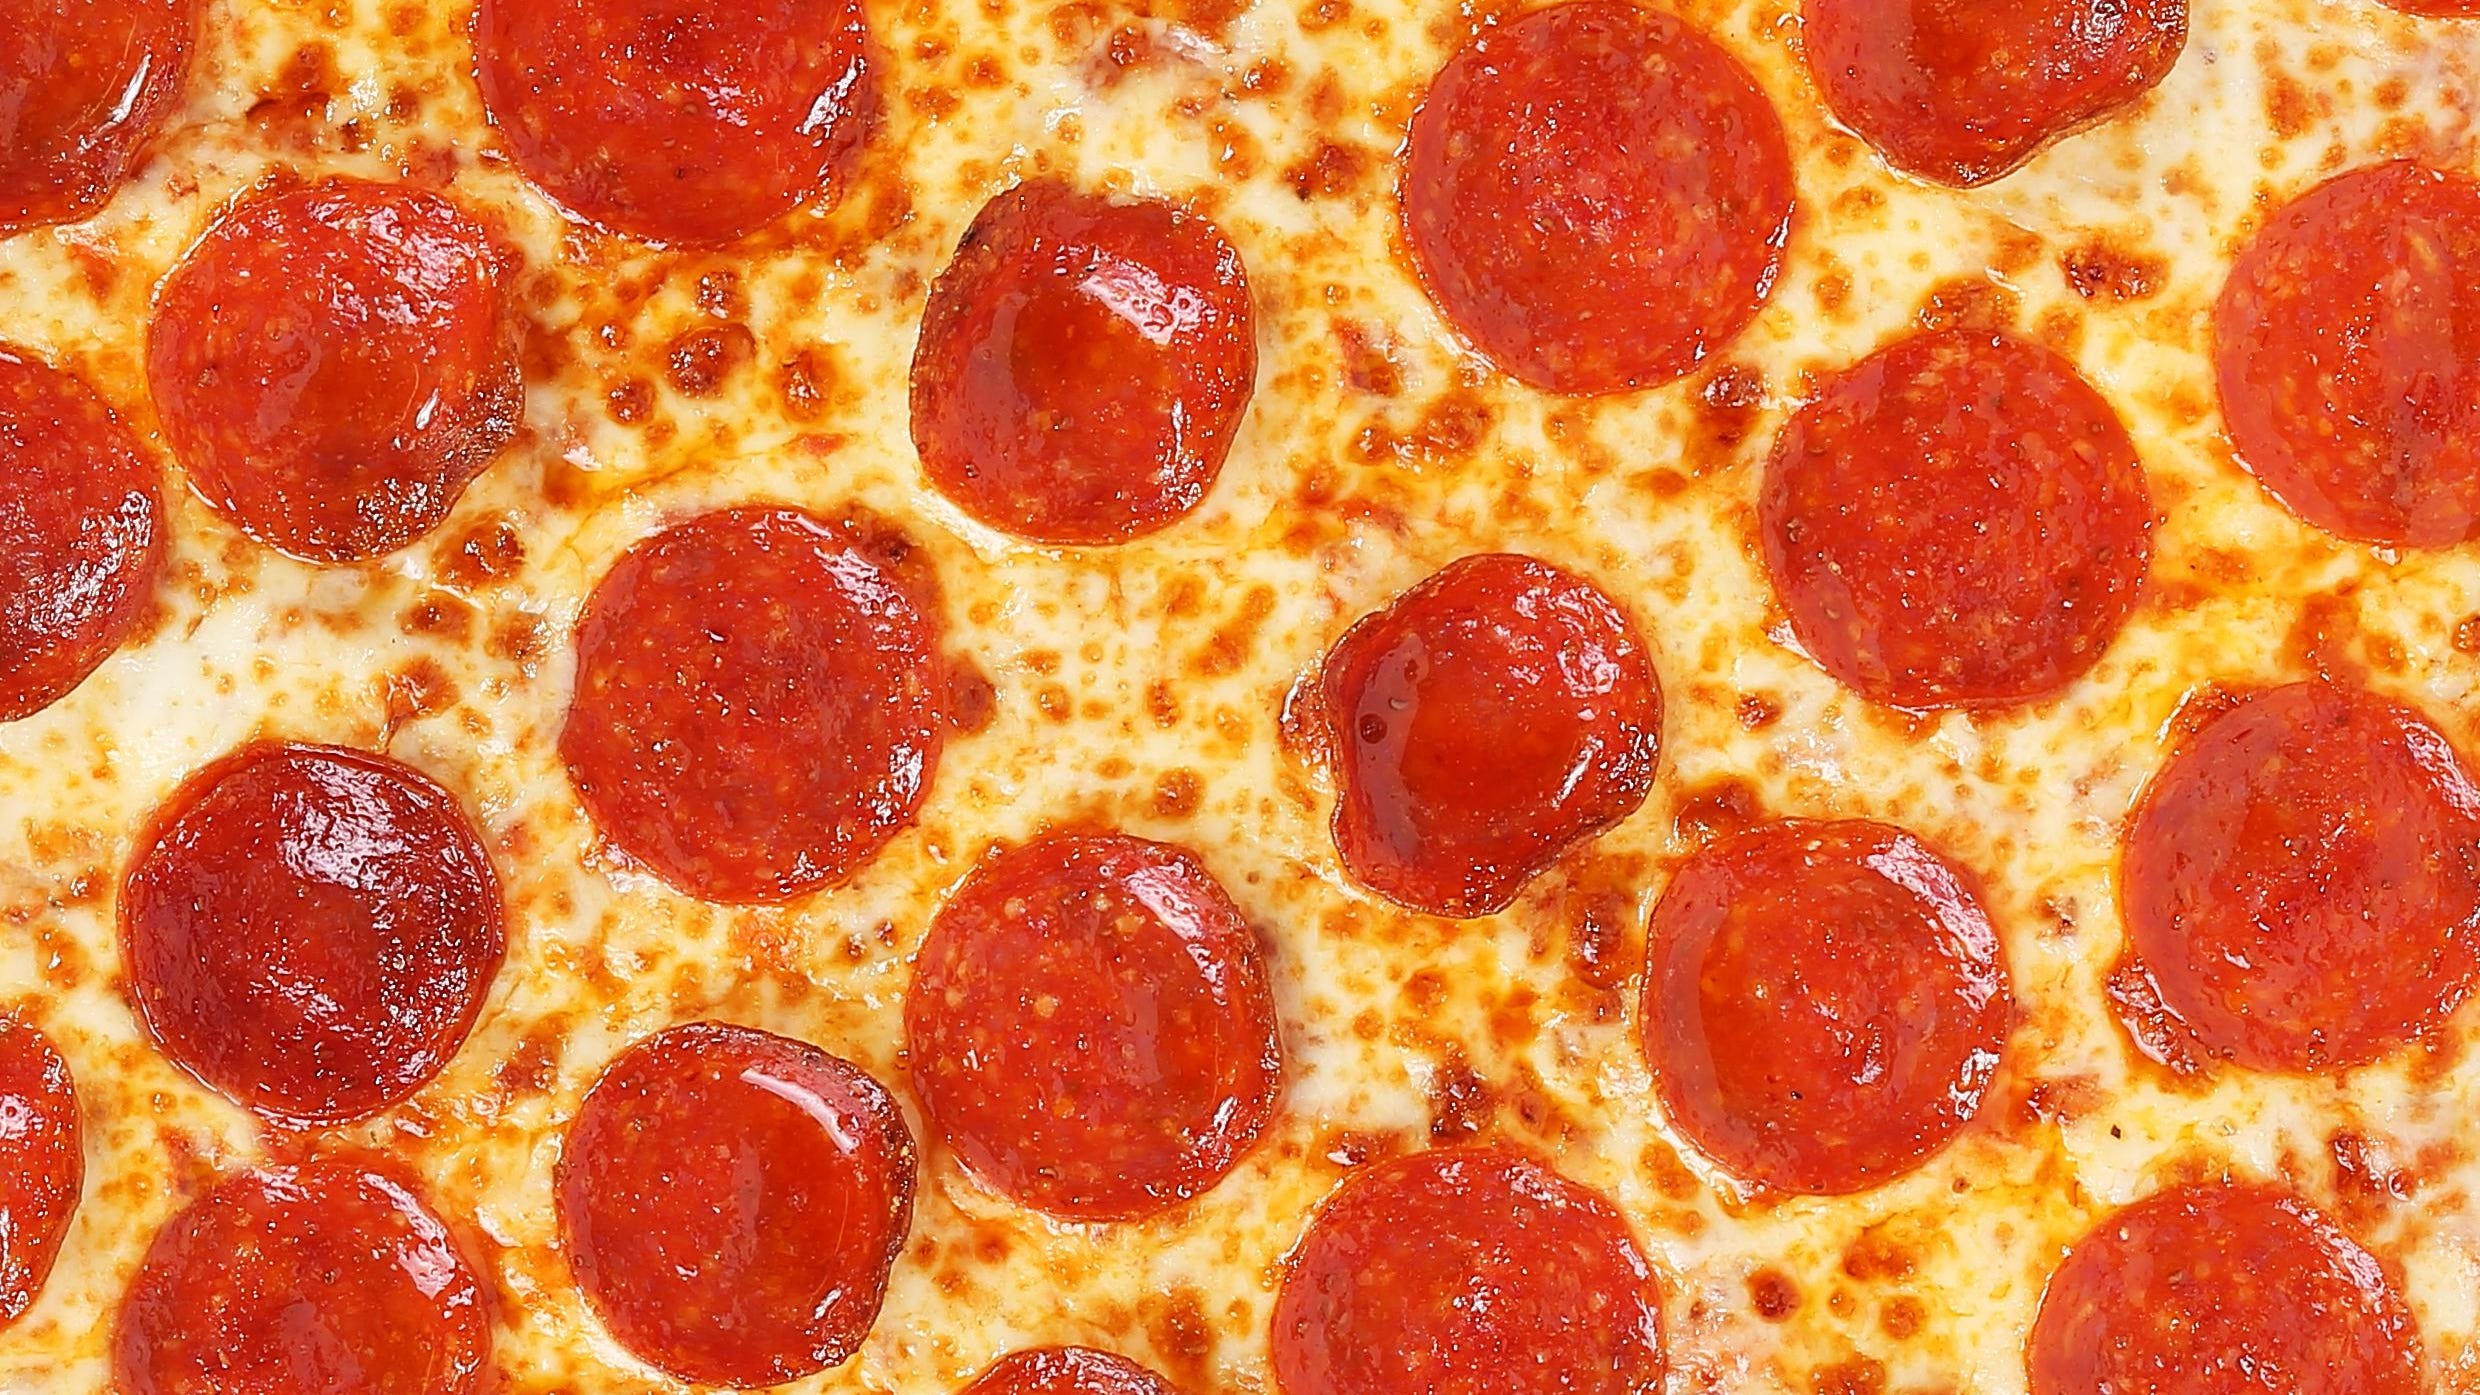 Market basket: Enjoy the comfort of a simple pepperoni pizza